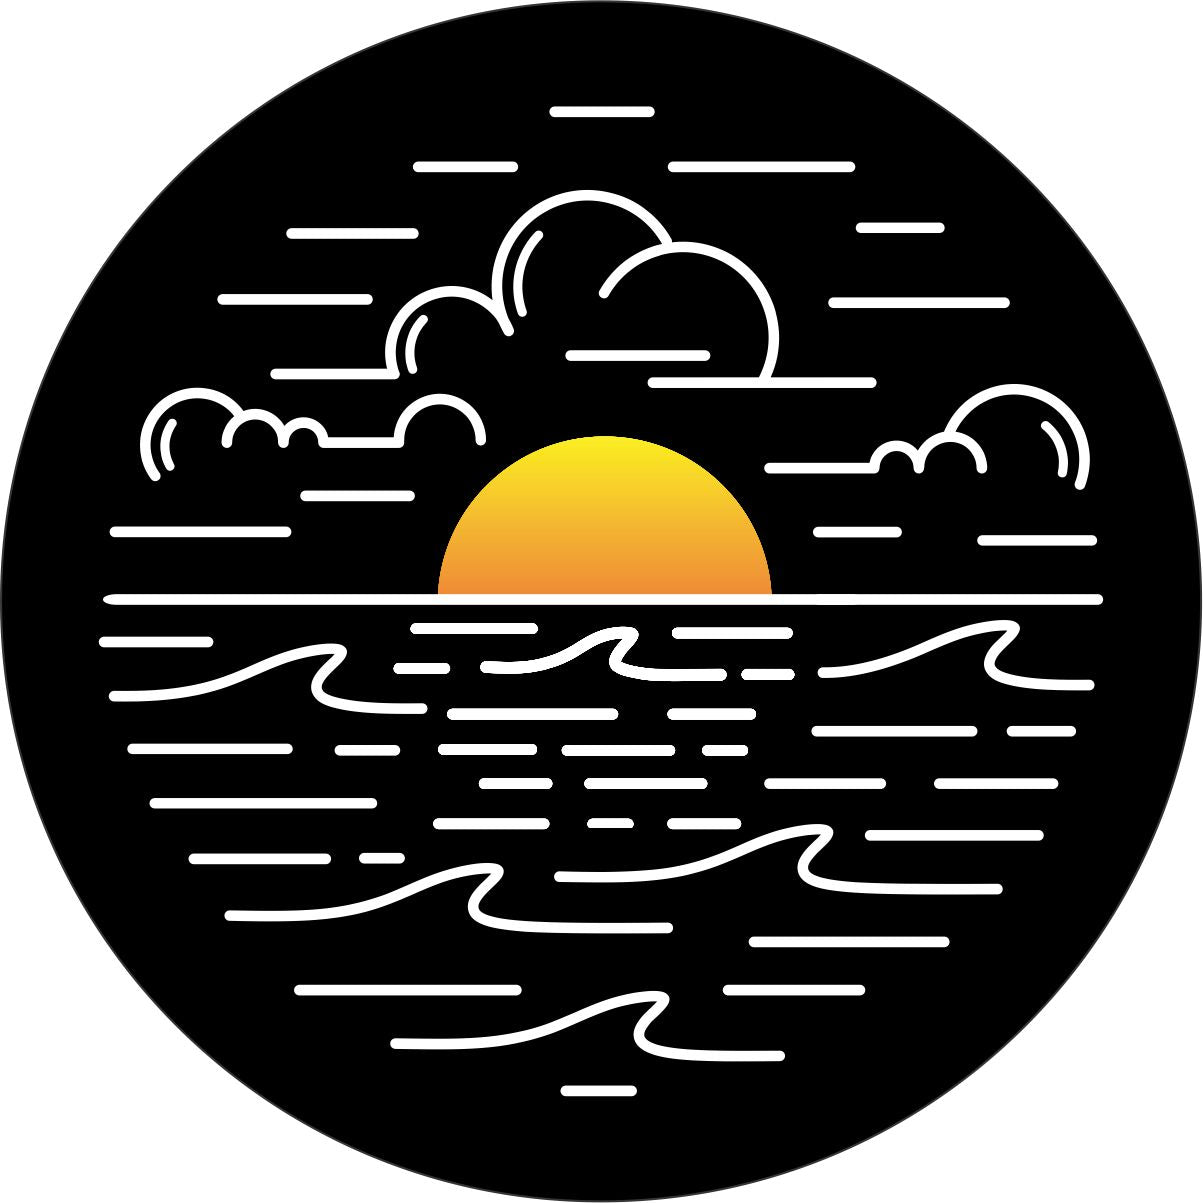 White line art landscape on black vinyl design of the water ocean and sky with a bright orange and yellow sun falling on the horizon spare tire cover.